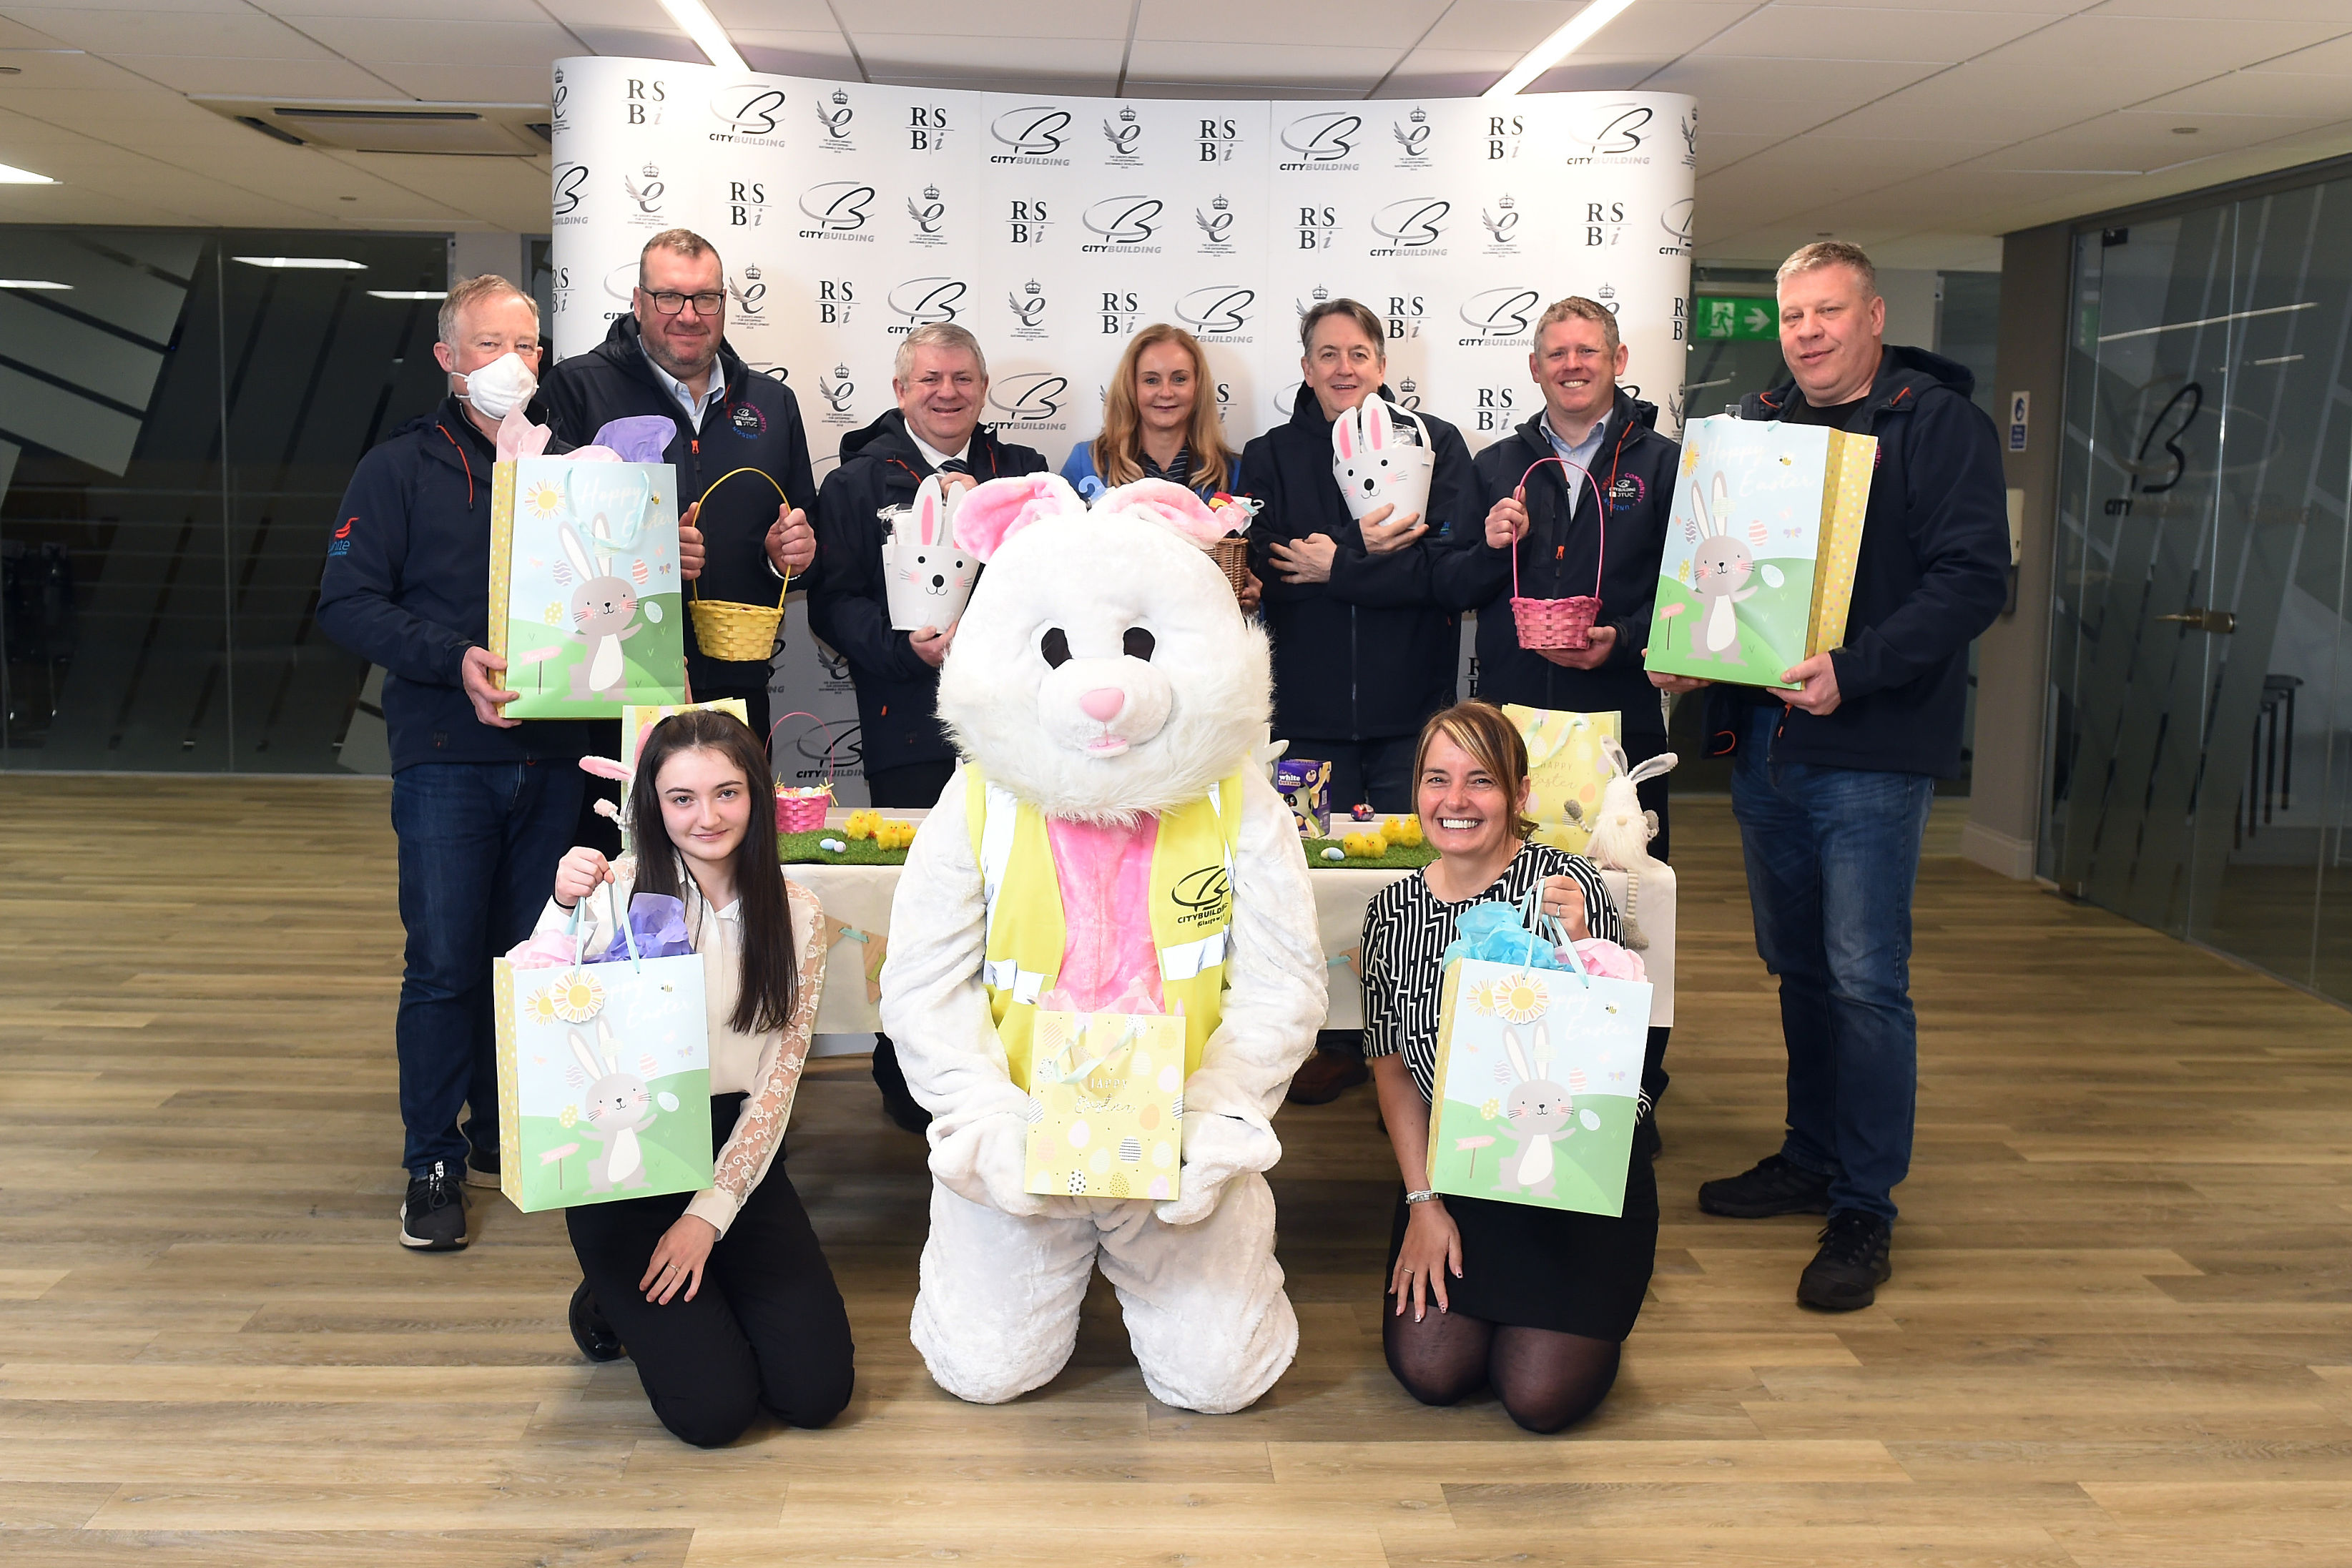 City Building’s Joint Trade Union Committee gives back this Easter